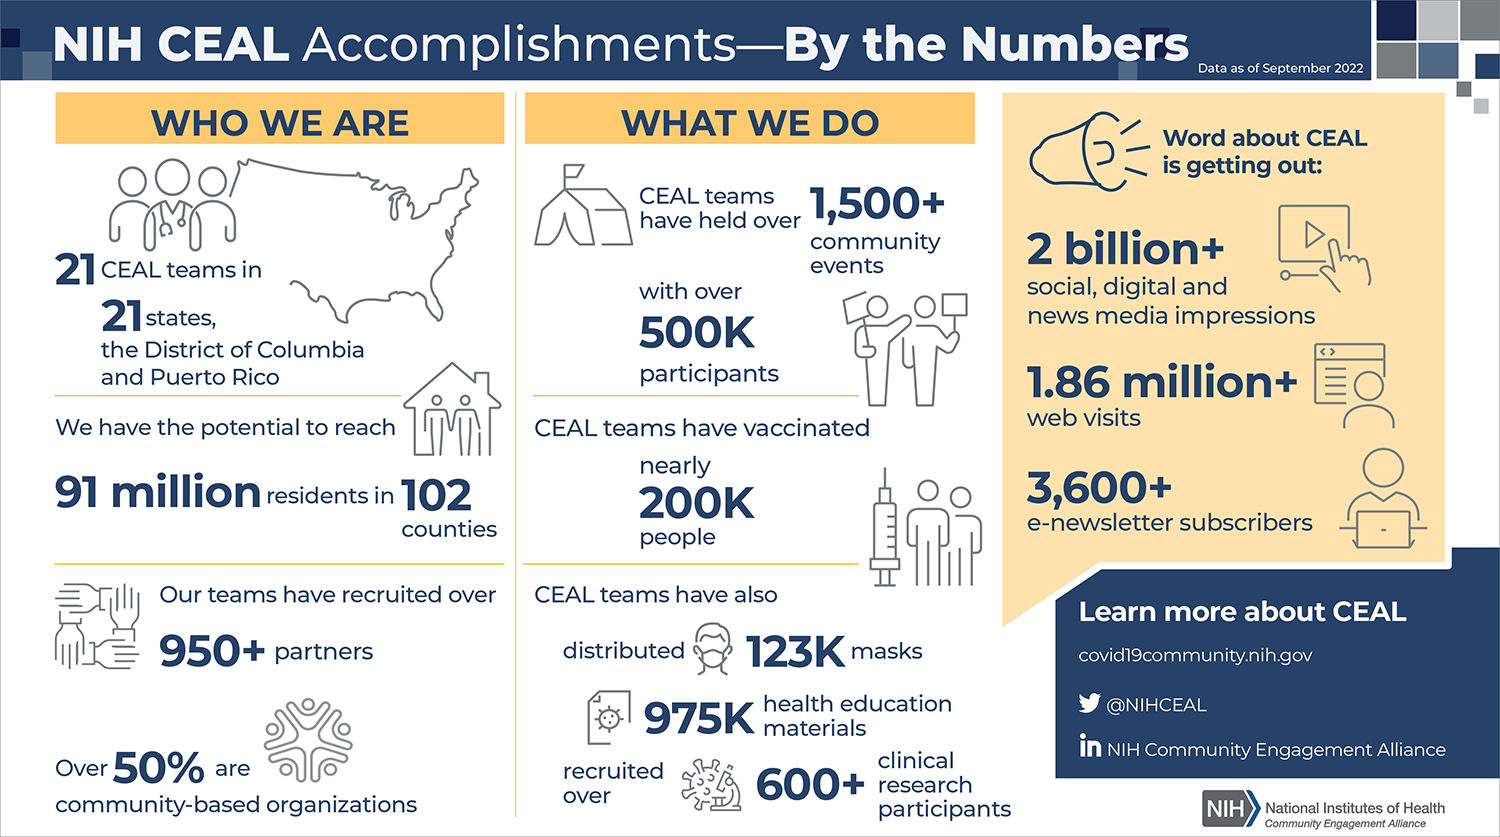 NIH CEAL has made a big impact on the prevention and treatment of COVID-19 in the two years since its launch. View the infographic for statistics about our impact, including our collaborations, vaccine-related events, and research.